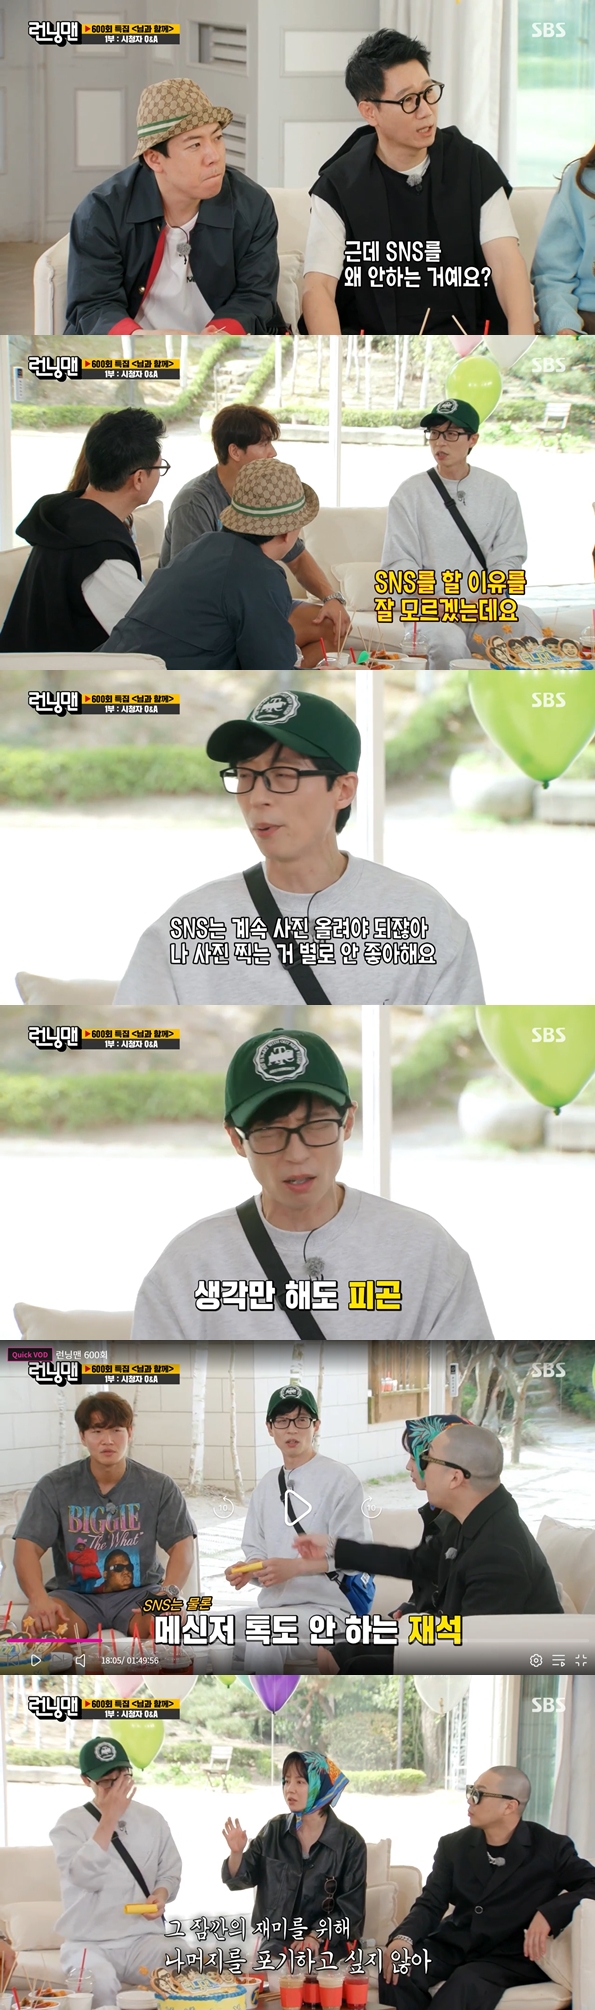 Running Man gave a thank-you to viewers for the 600th special feature and donated 7 million won for low-income people.Yoo Jae-Suk reveals why she doesnt do SNS and The Messenger ServiceSBS Running Man, which was broadcast on the 24th, was featured 600 times and race was held with the audience.In the first part, the audiences Q&A section was held, and in the second part, the character acting was not likely at all due to the request of the audience.The production team received questions from viewers through the official SNS of Running Man and had a question and answer time comfortably.The first question was whether Yo Jae-Suk, who is known to not do SNS, has a secret account.This is because Yo Jae-Suk was aware of all the SNS news of the members without SNS.Yoo Jae-Suk said it first identifies information through an internet cafe.When the members suspected that they knew too much detail, Yo Jae-Suk replied, Lets take that.Yoo Jae-Suk denied the SNS secret account until the end, saying, I have seen all the things I can see on YouTube these days.When the members asked, Why dont you do SNS? Yo Jae-Suk replied, I dont know why youre doing SNS. Then he said, SNS has to keep up the photos.I dont like to upload that picture, he said.Yoo Jae-Suk then also revealed why he did not use The Messenger Service; Yoo Jae-Suk said, Its annoying.But when I do, I get a number that I know. I come up with a few conversations in the group room. When Kim Jong-kook said, There are times when group chat rooms are fun, Song Ji-hyo said, I do not want to give up the rest for that little fun.The two are the only members of Running Man who do not use The Messenger Service.Yoo Jae-Suk agreed to Song Ji-hyo, You are logical.Then came questions asking about the secret of Ji Suk-jins steel mentality, the feelings of Yang Se-chan, who had been tearful of the Grand Prize.Ji Suk-jin reveals he is not hurt because he believes other members are not sincere when they tease him.Yang Se-chan revealed that the burden was high when he joined the early Running Man.I did nothing at the real weekend entertainment, but it was so hard all the way to the car that my brothers did well when I went home, he said.There are people who need time, Im a case like that, it took me nine years, Yoo Jae-Suk comforted Yang Se-chan.But Yoo Jae-Suk flipped Yang Se-chans stomach by saying he received comments from viewers saying what is it and thats what it is and getting paid.Yang Se-chan said, Im going to go. Hey, how much! Ill pay for it. Ill pay for it.Finally, Yoo Jae-Suk said, So what I want to say is that Sechan has been so good as we expected, but it took time.Part 2 was conducted as Mission, which plays characters that are not likely to do at all.The usual modest Yoo Jae-Suk is a character who boasts money, the Yang Se-chan is a male character who lacks common sense, the introspective Song Ji-hyo is a nuclear in-sat character, the muscle man Kim Jong-kook is a slender paper doll, the 4-dimensional Jeon So-min is a hanbok-weared etiquette girl, the Ji Suk-jin is a tough character, He took on a character who loved Running Man.The first Mission was revived by Ji Suk-jins cooking class at the request of viewers.Ji Suk-jin pushed Kim Jong-kooks chest, rejecting the cooking class, and shouted, If you have to do it!Kim Jong-kook laughed at the crying Do not push my brother.Jean So-min emphasized etiquette by raising the temple without a glance, and Song Ji-hyo showed off his insammy by shouting the extension Boombarstick.Yoo Jae-Suk laughed and showed off his wealth by saying that million won at the PDs donation of 1 million won.Haha, who cares about Running Man, was saddened that he should stop cooking classes.The second Mission went to Mission, which did not knock over the bowling pin, and the third Mission went to Mission, which hit the table tennis ball and turned off the candle.Running Man members joined forces to celebrate the 600th anniversary to create a miracle to draw candles with a table tennis ball and donated 7 million won to the Central Provident Fund.Song Ji-hyo was selected as the final winner.Song Ji-hyo has the authority to send coffee tea to the desired shooting scene and donate donations to low-income children in his name.The final penalty was Ji Suk-jin, who wrote a letter thanking viewers after everyone left work.